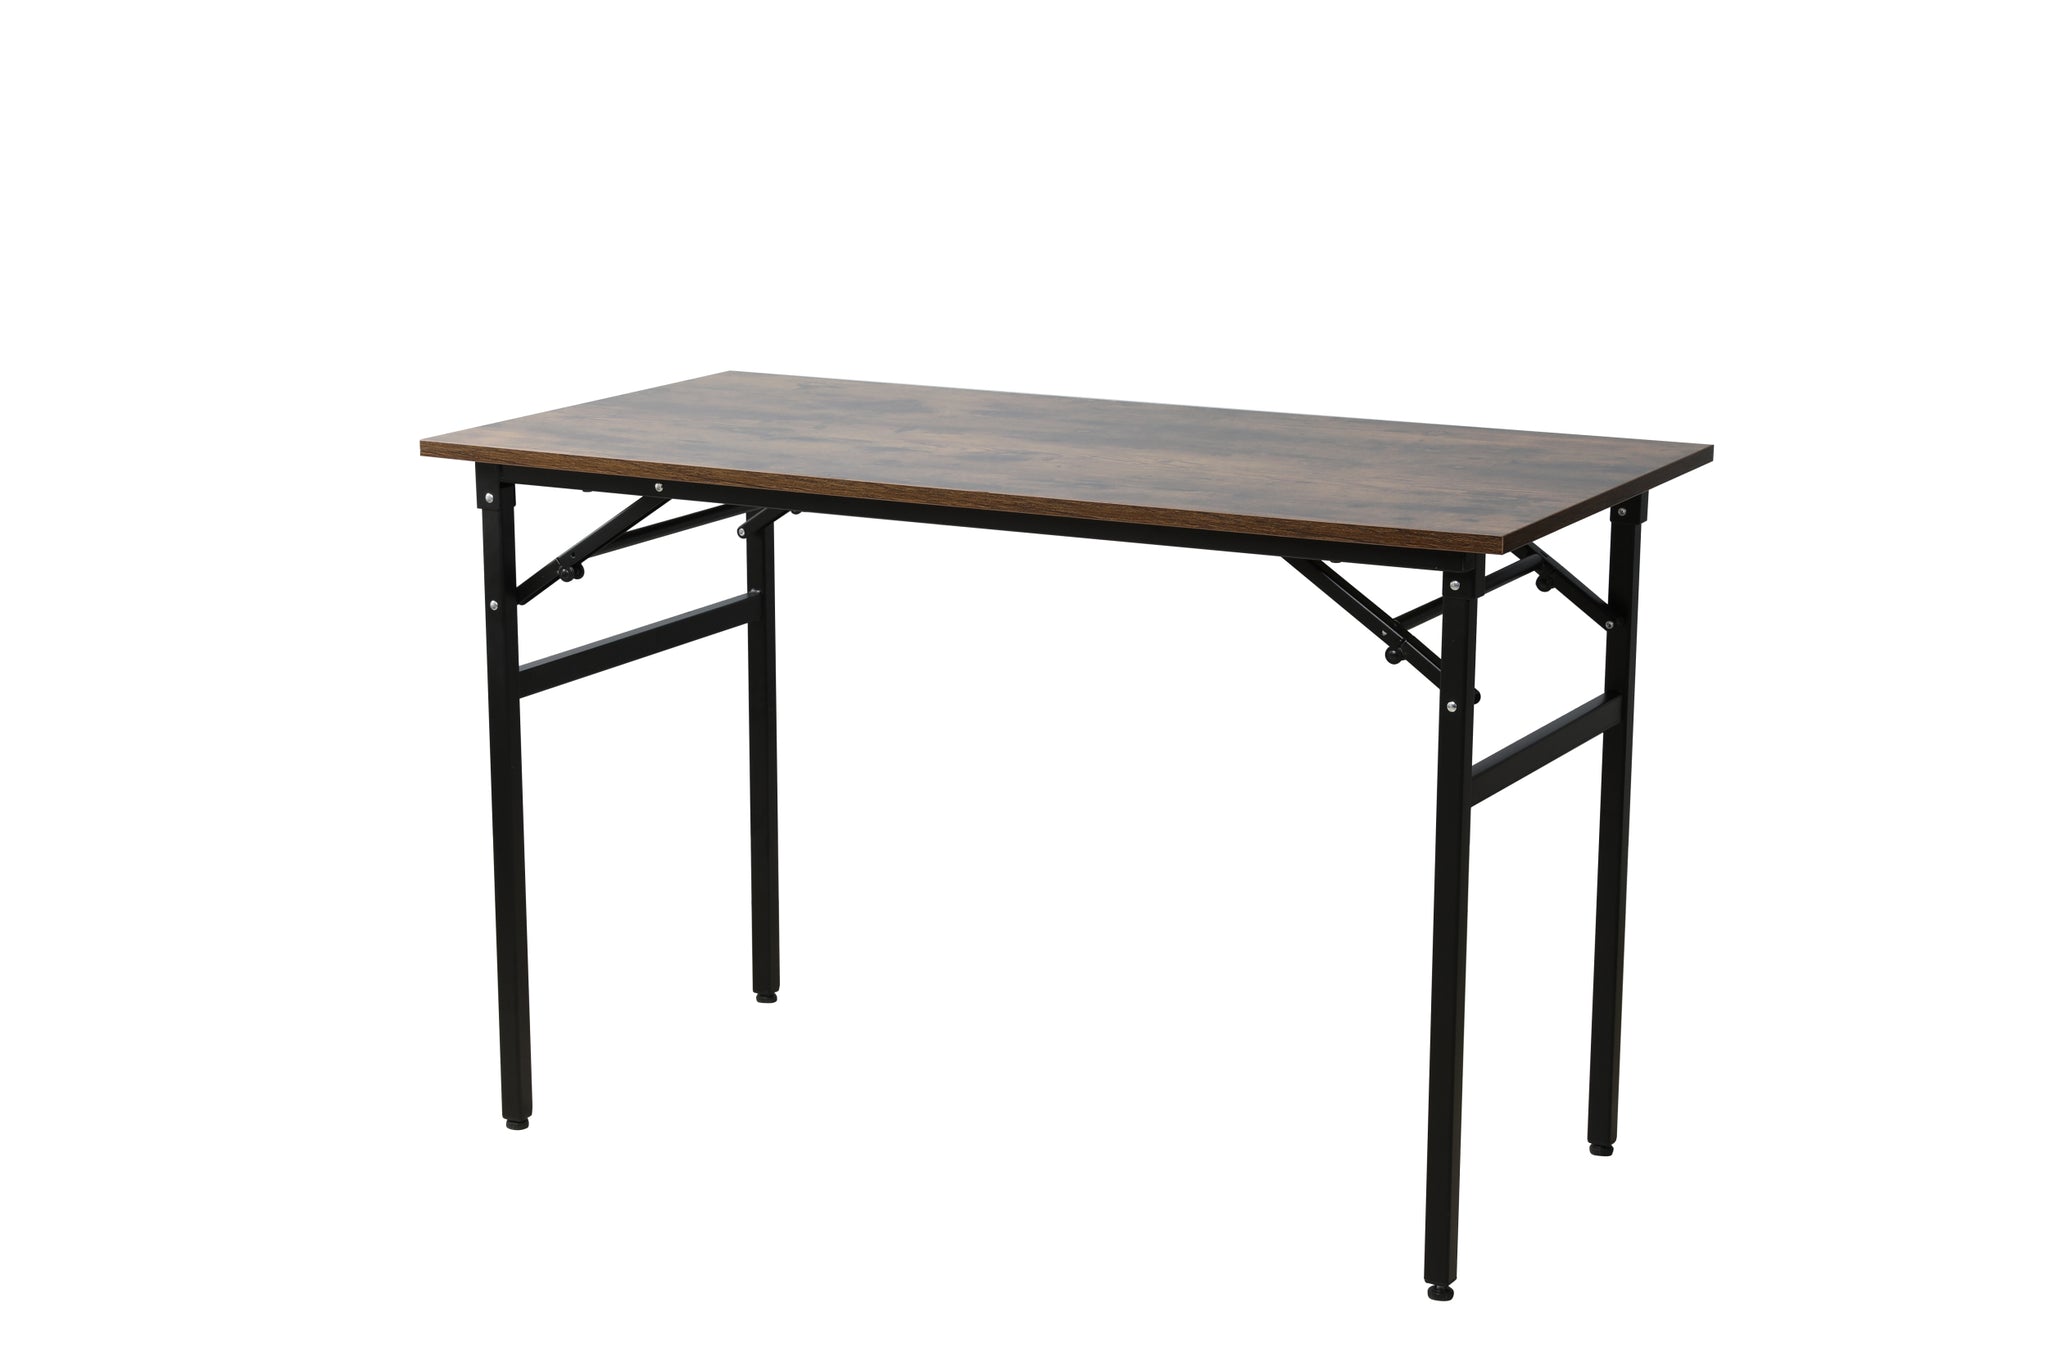 Folding table desk 31.5x15.7 inches computer black brown-mdf+steel